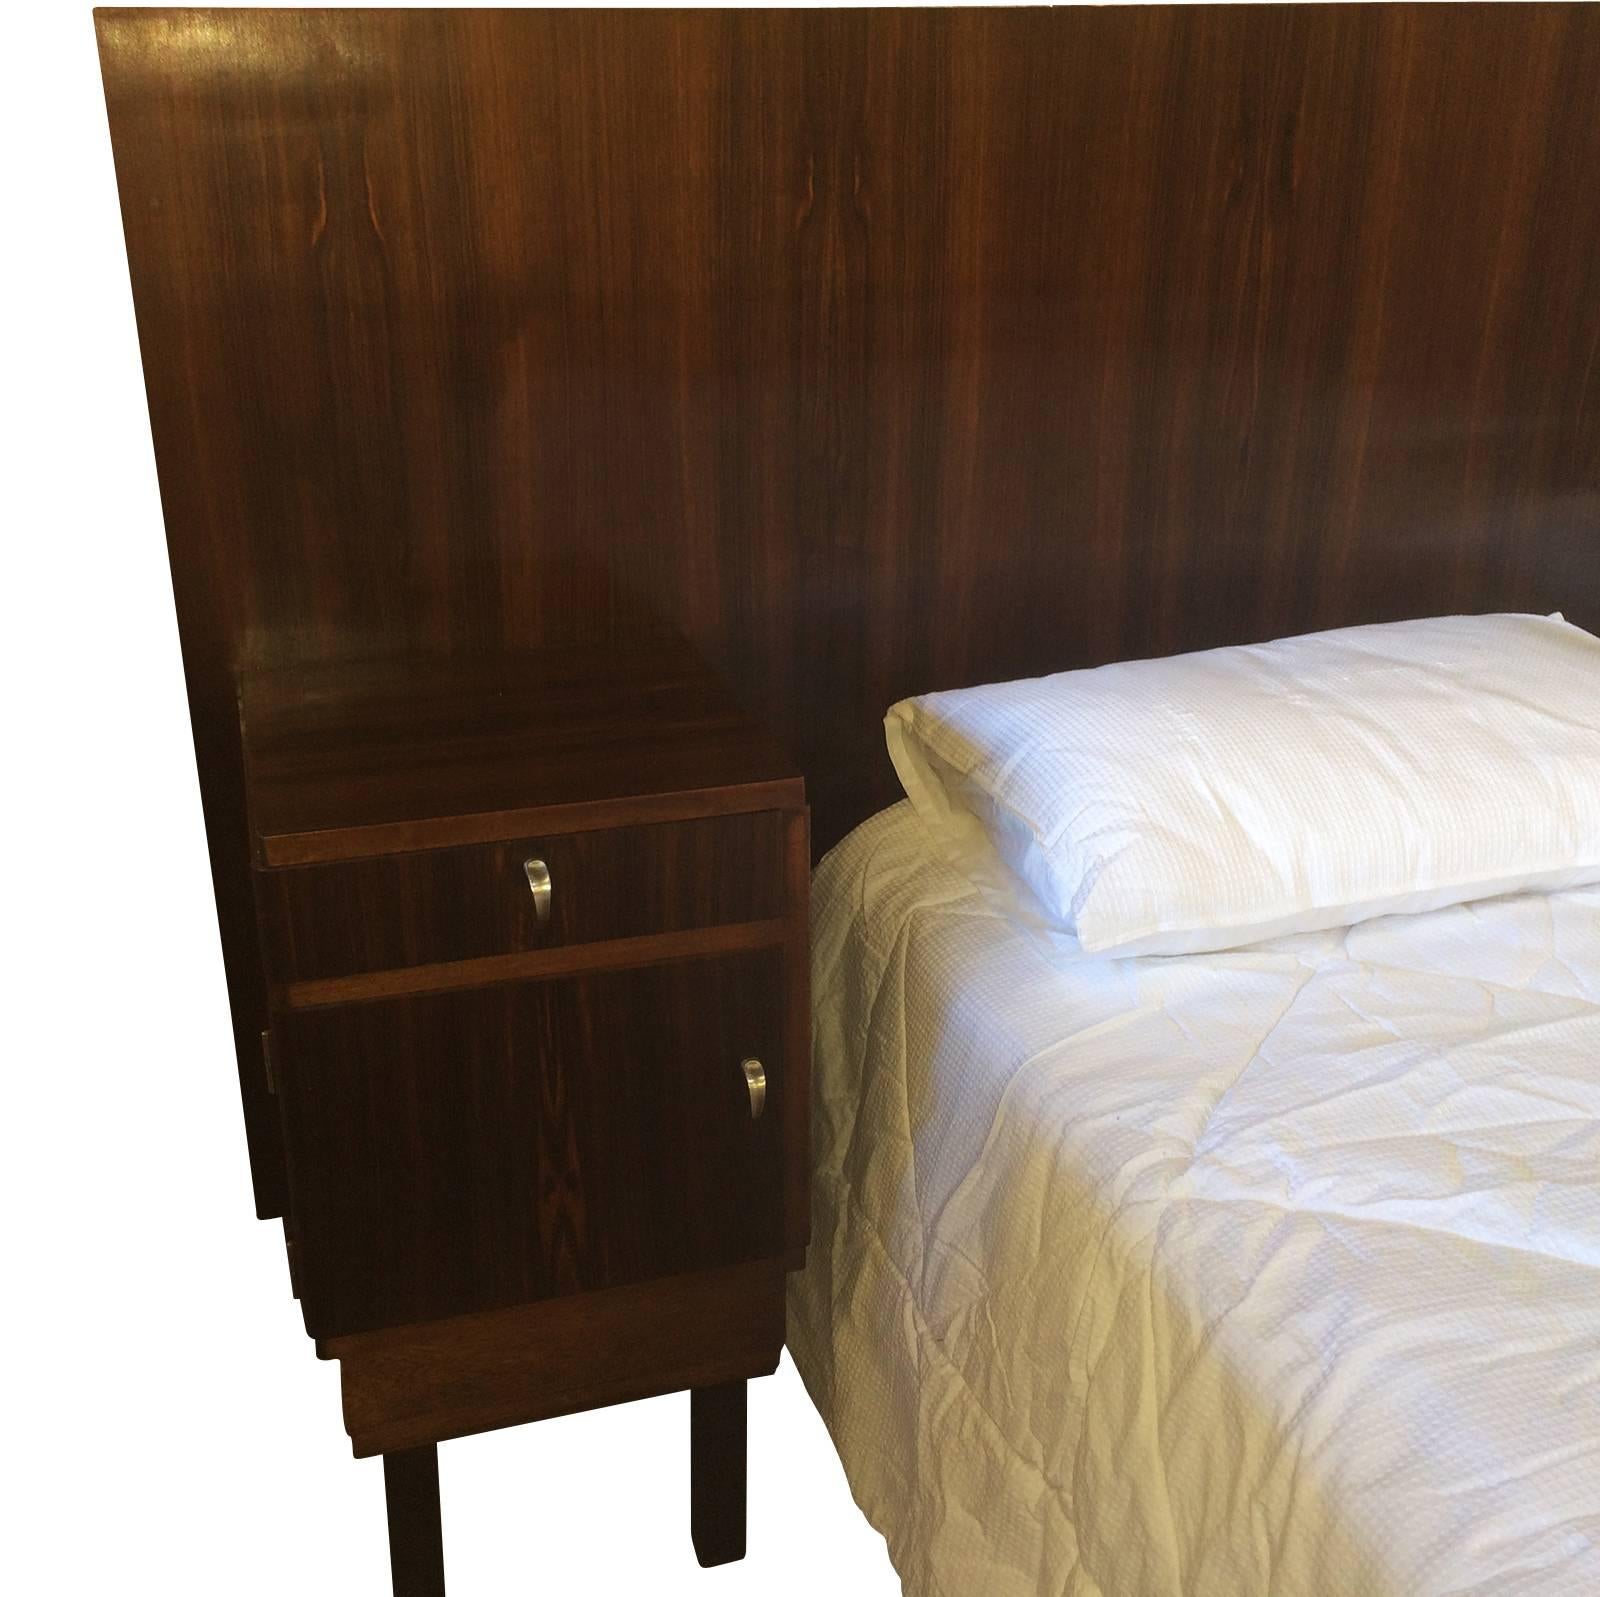 Mid-20th Century Art Deco Queen-Size Bed and Bedside Tables in Macassar Wood For Sale